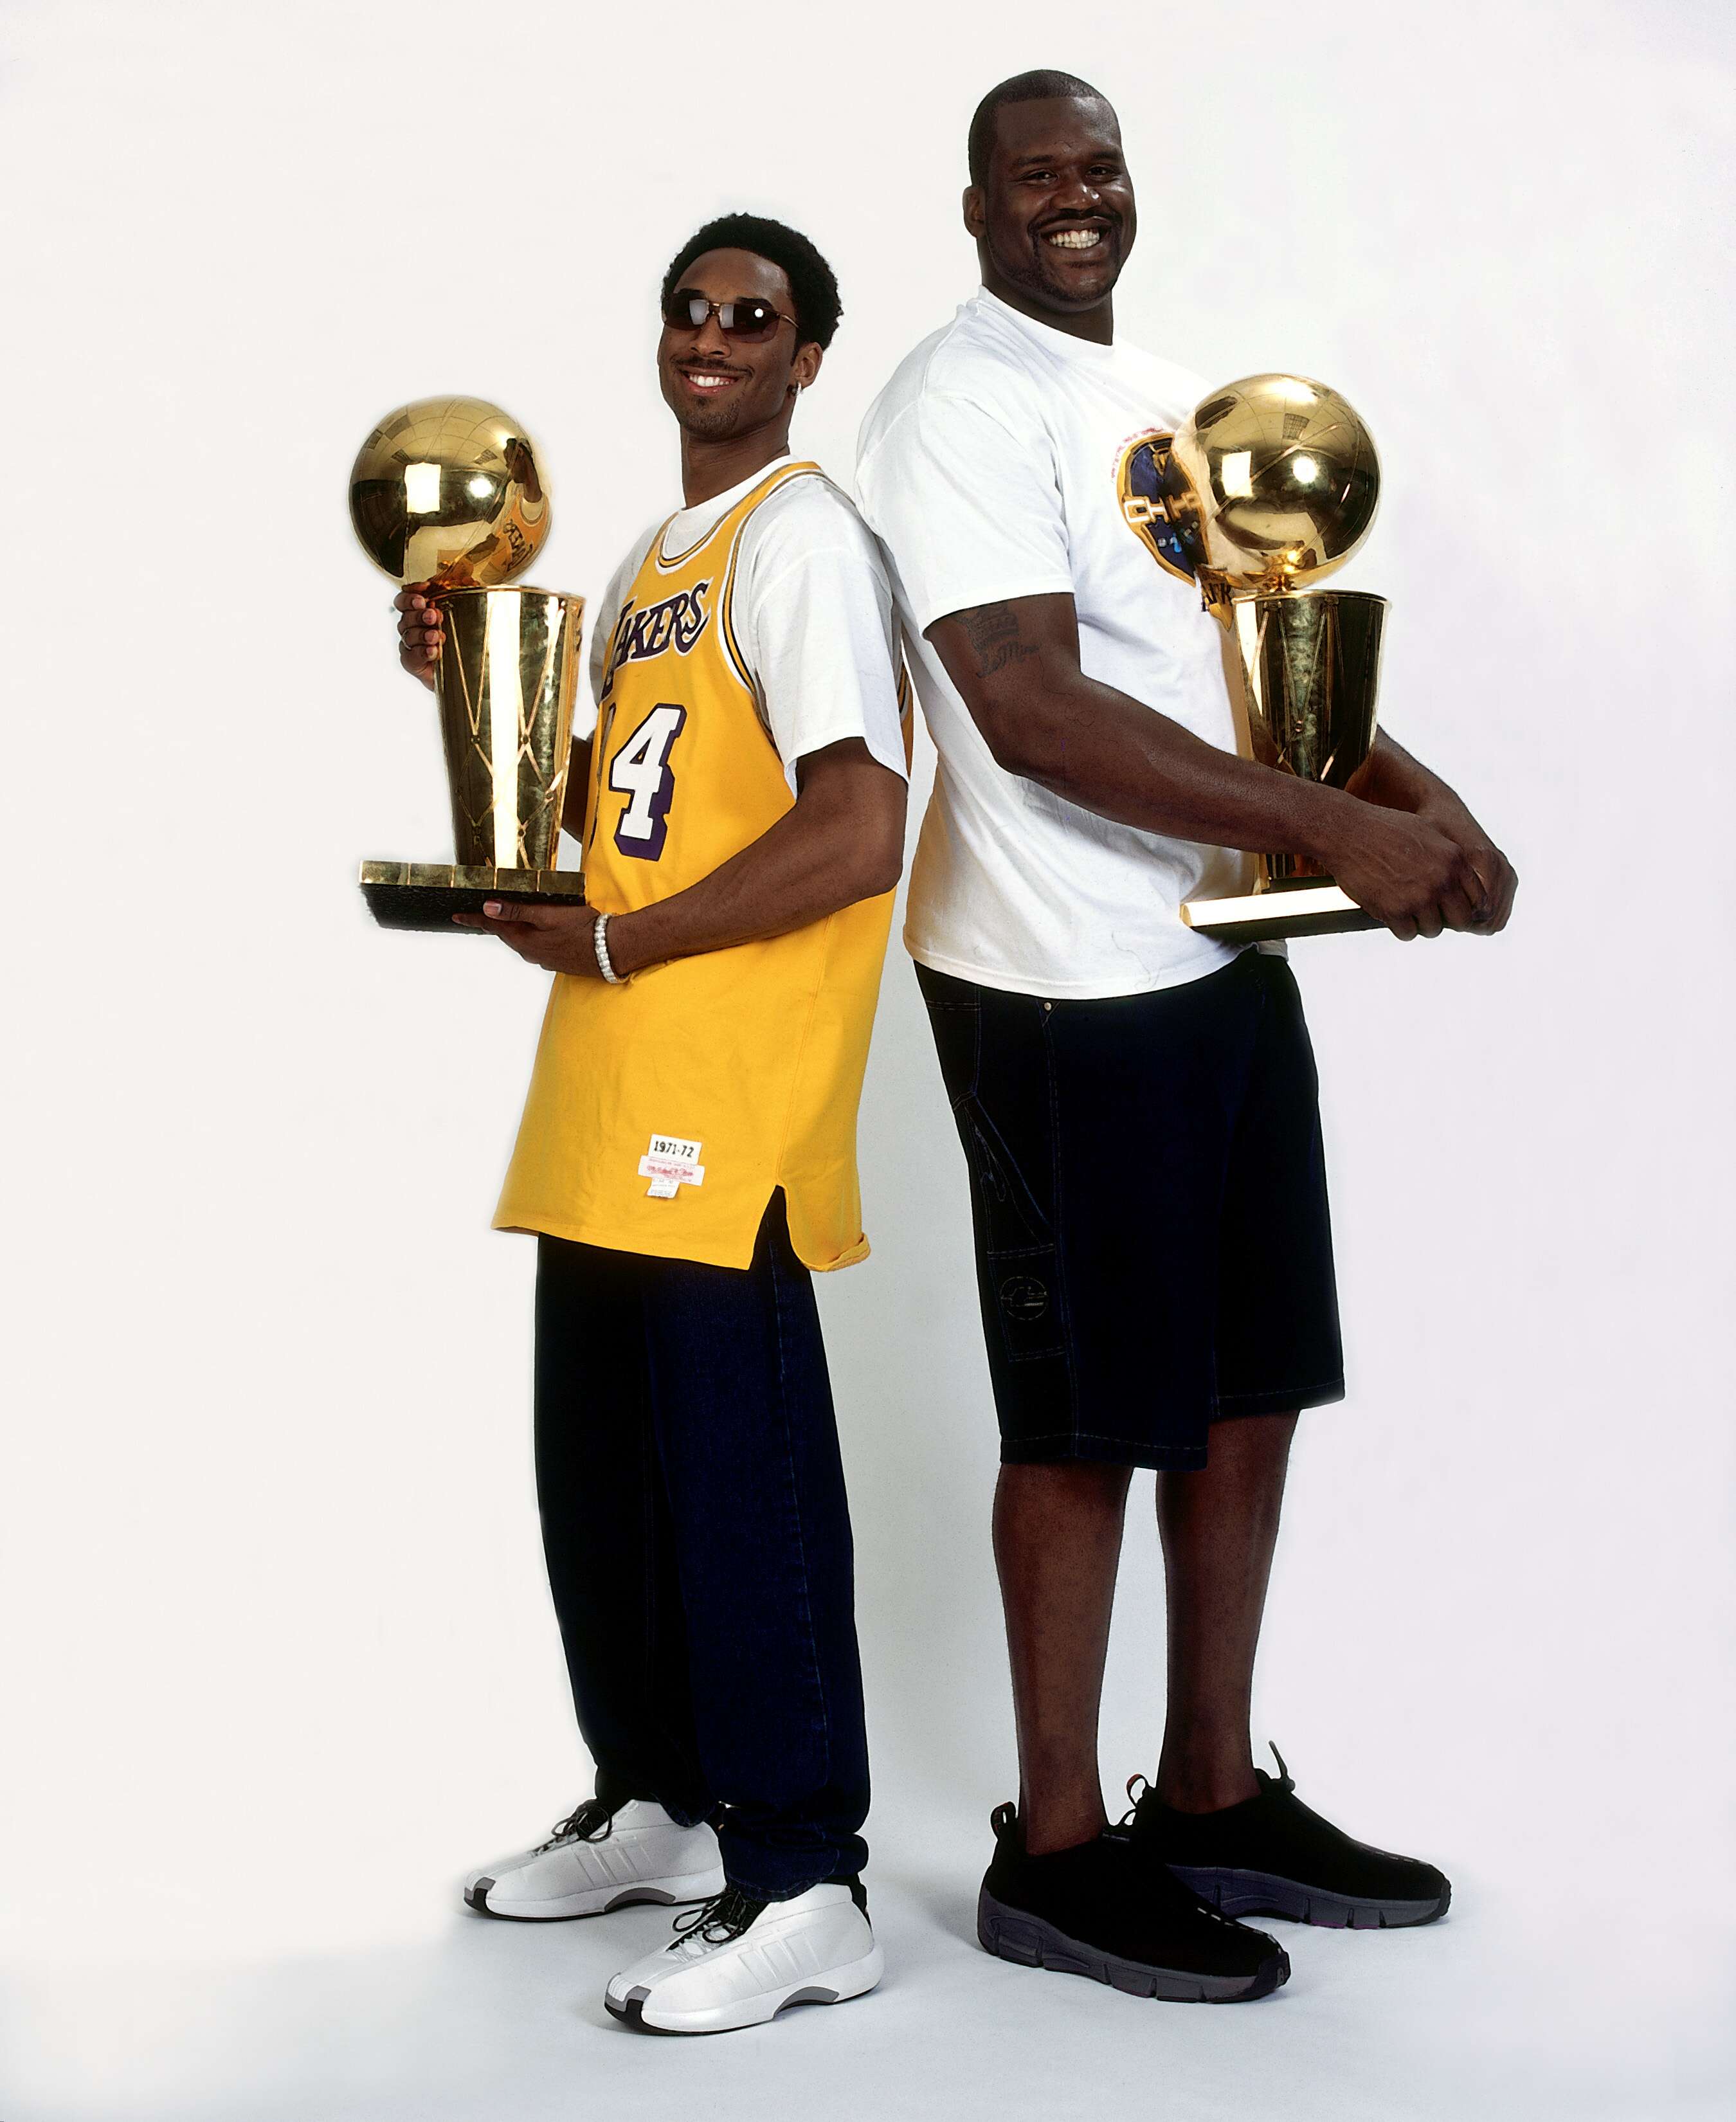 Kobe Bryant of the Los Angeles Lakers holds the championship